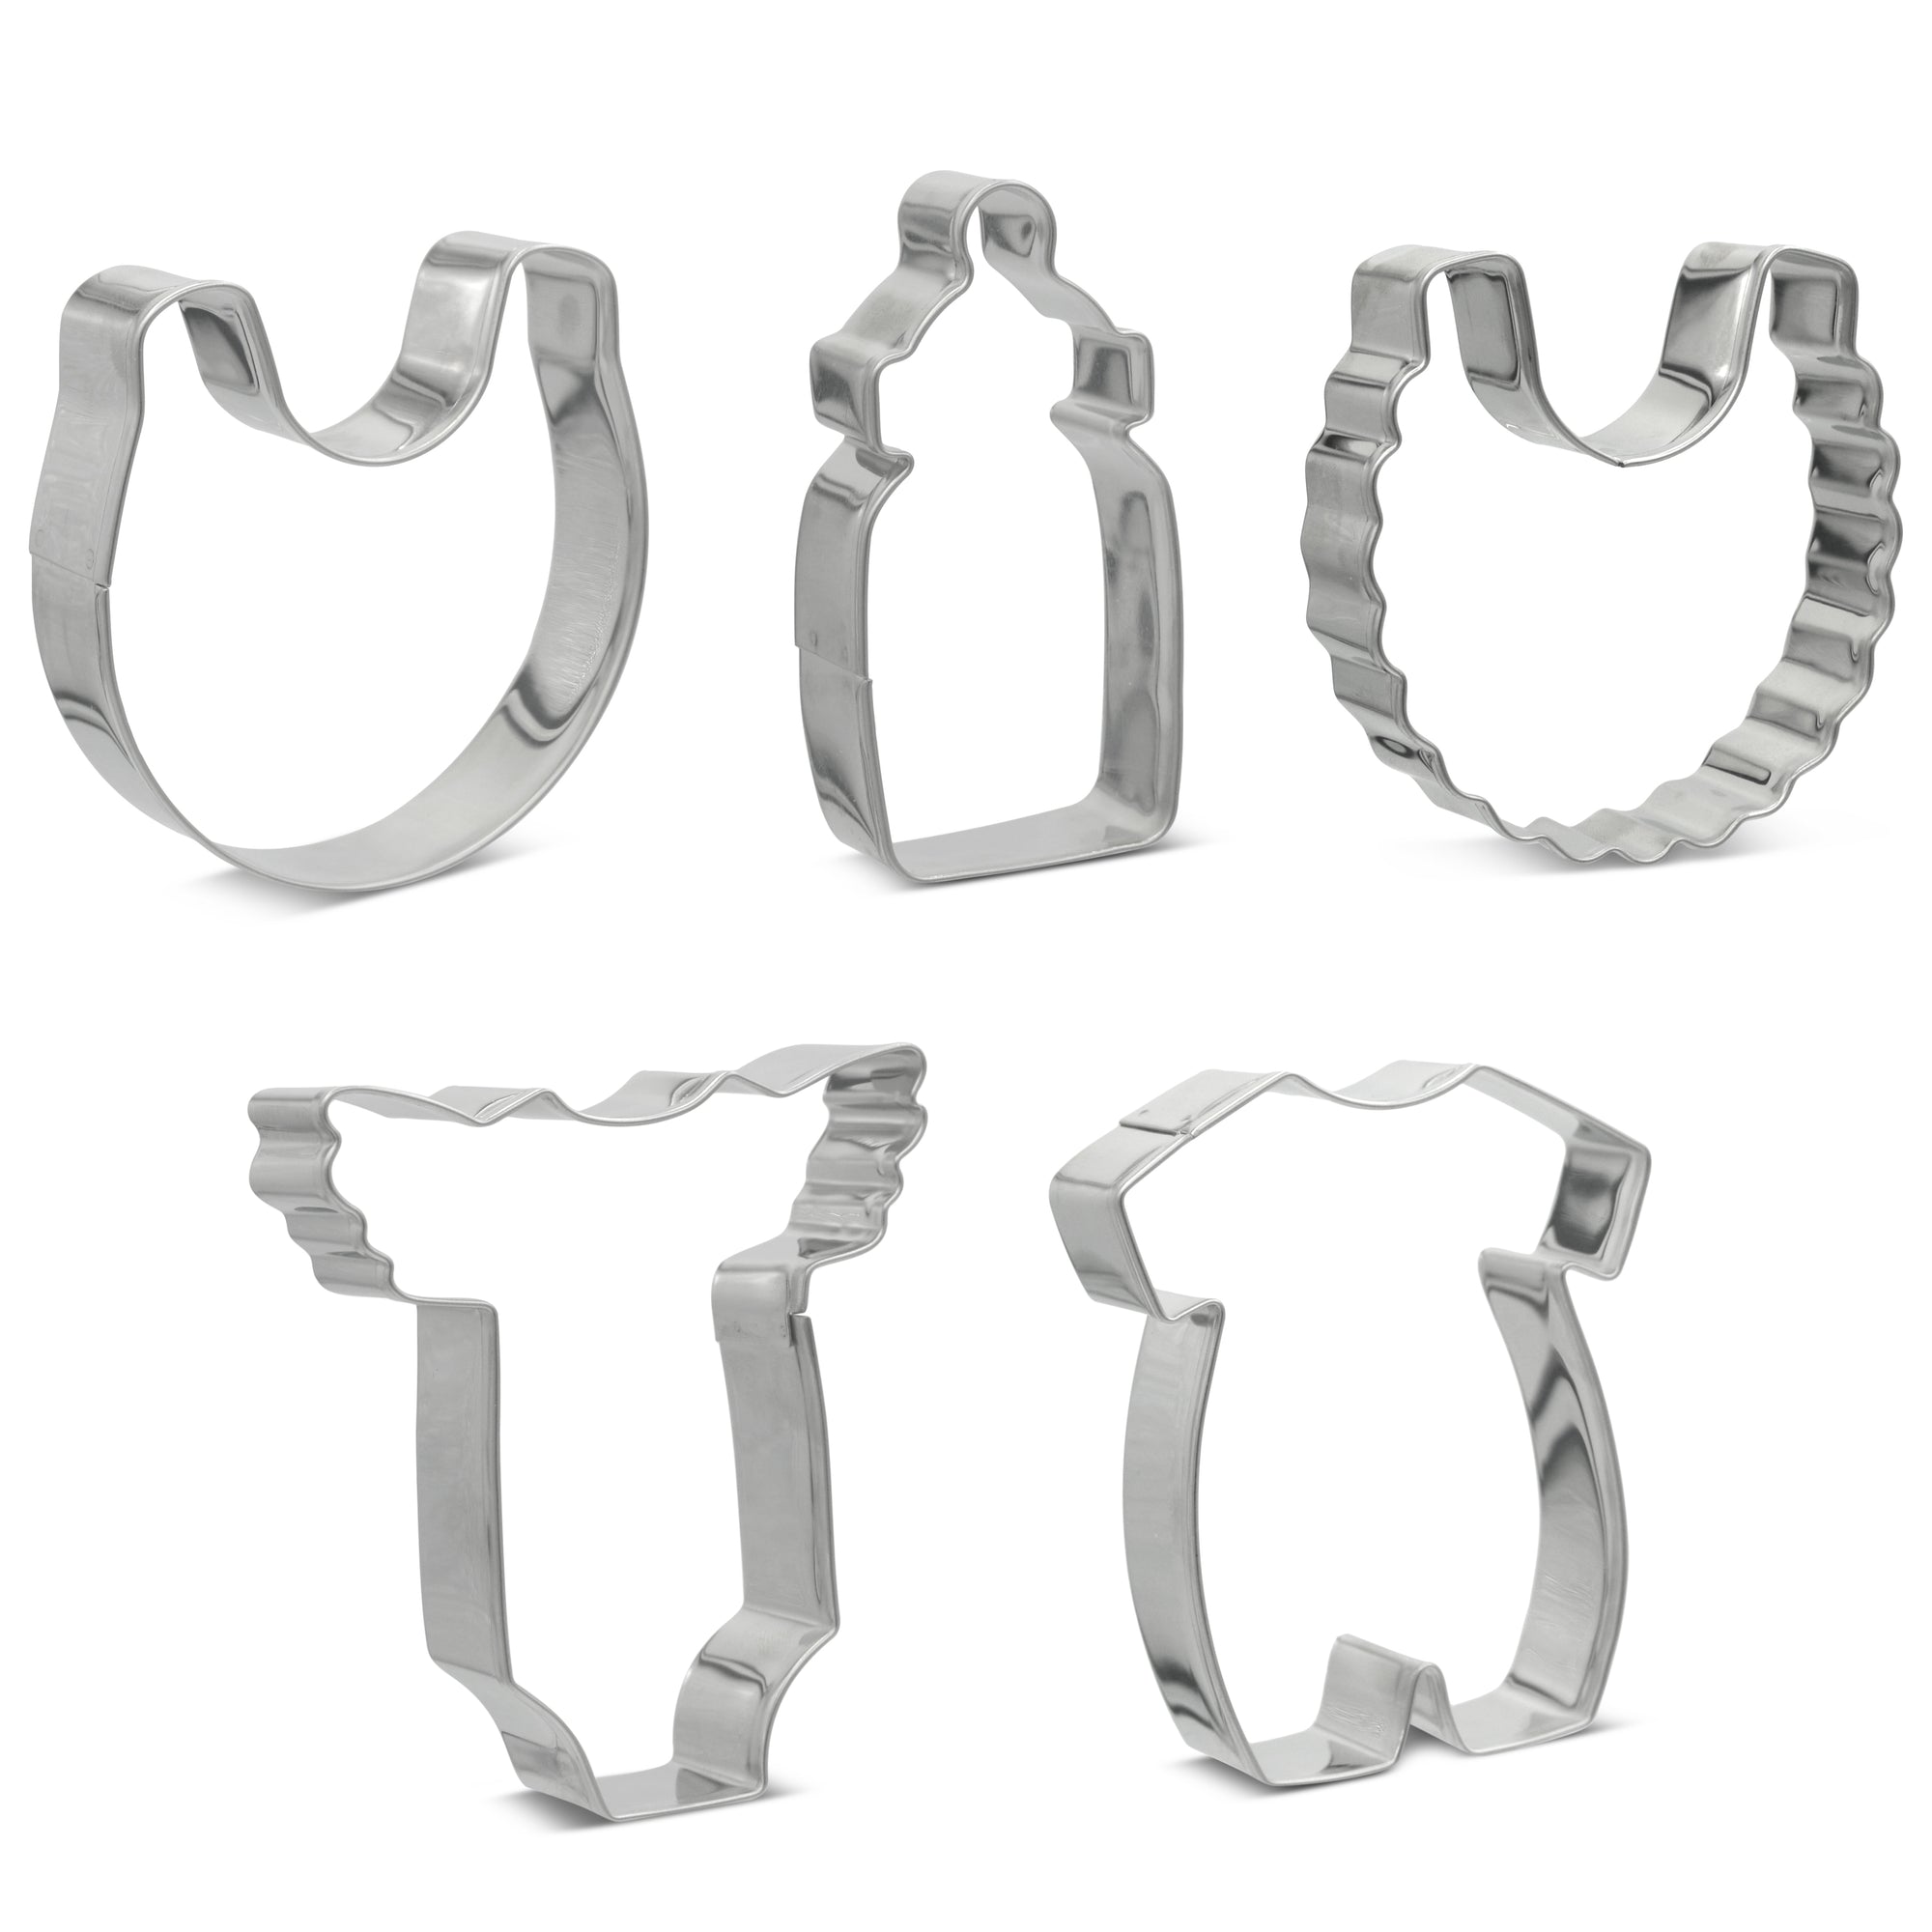 Baby Shower Cookie Cutter Set of 5 - Professional Quality Stainless Steel